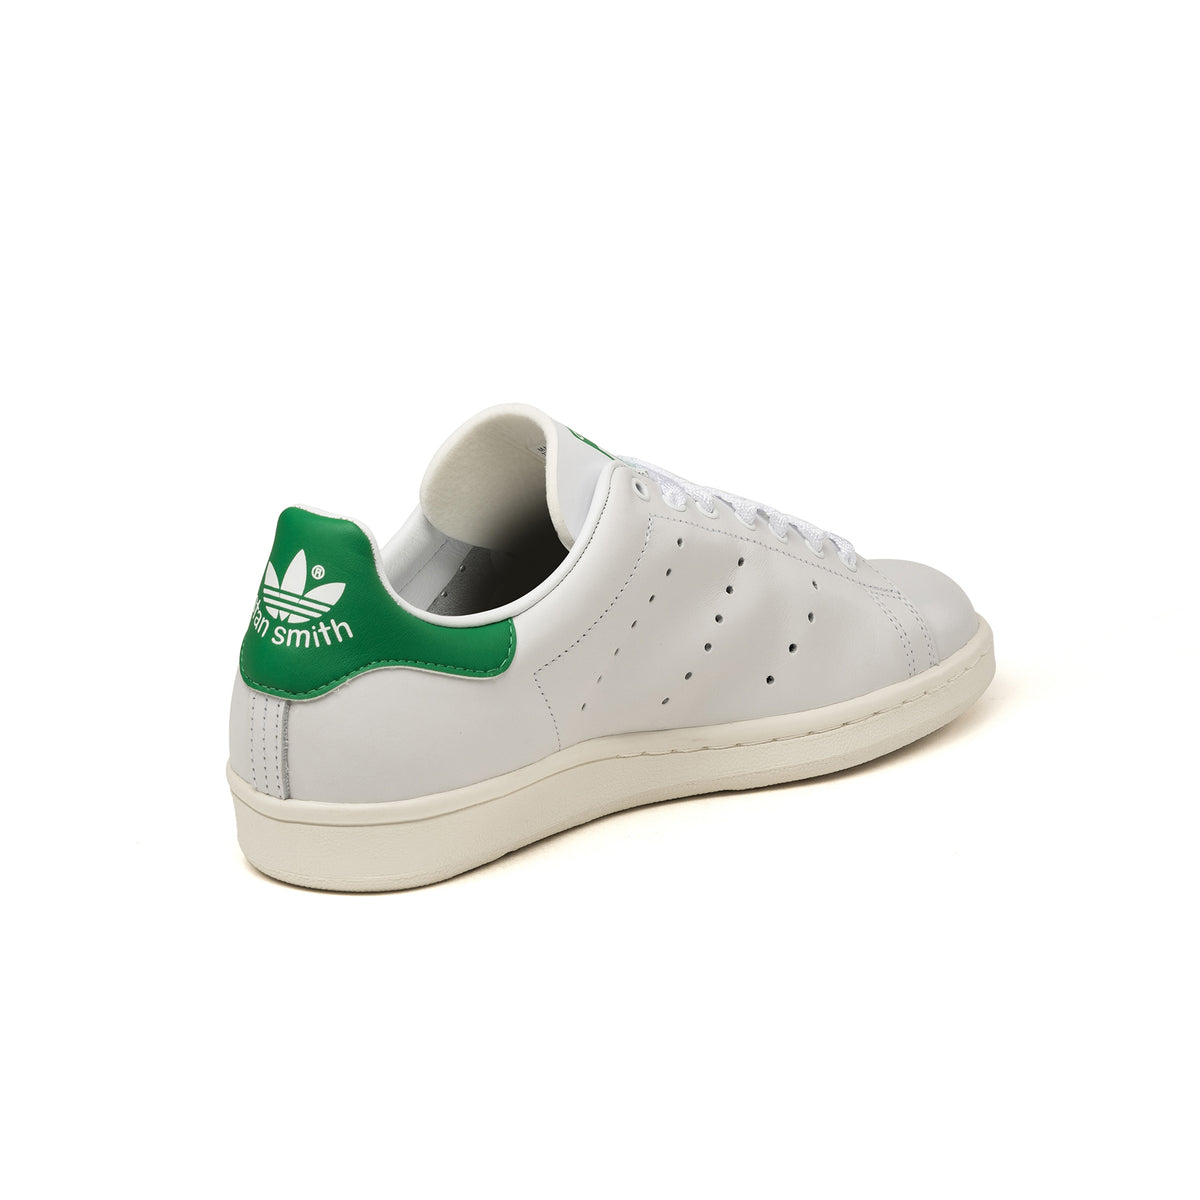 Adidas Stan Smith 80s – buy now at Asphaltgold Online Store!